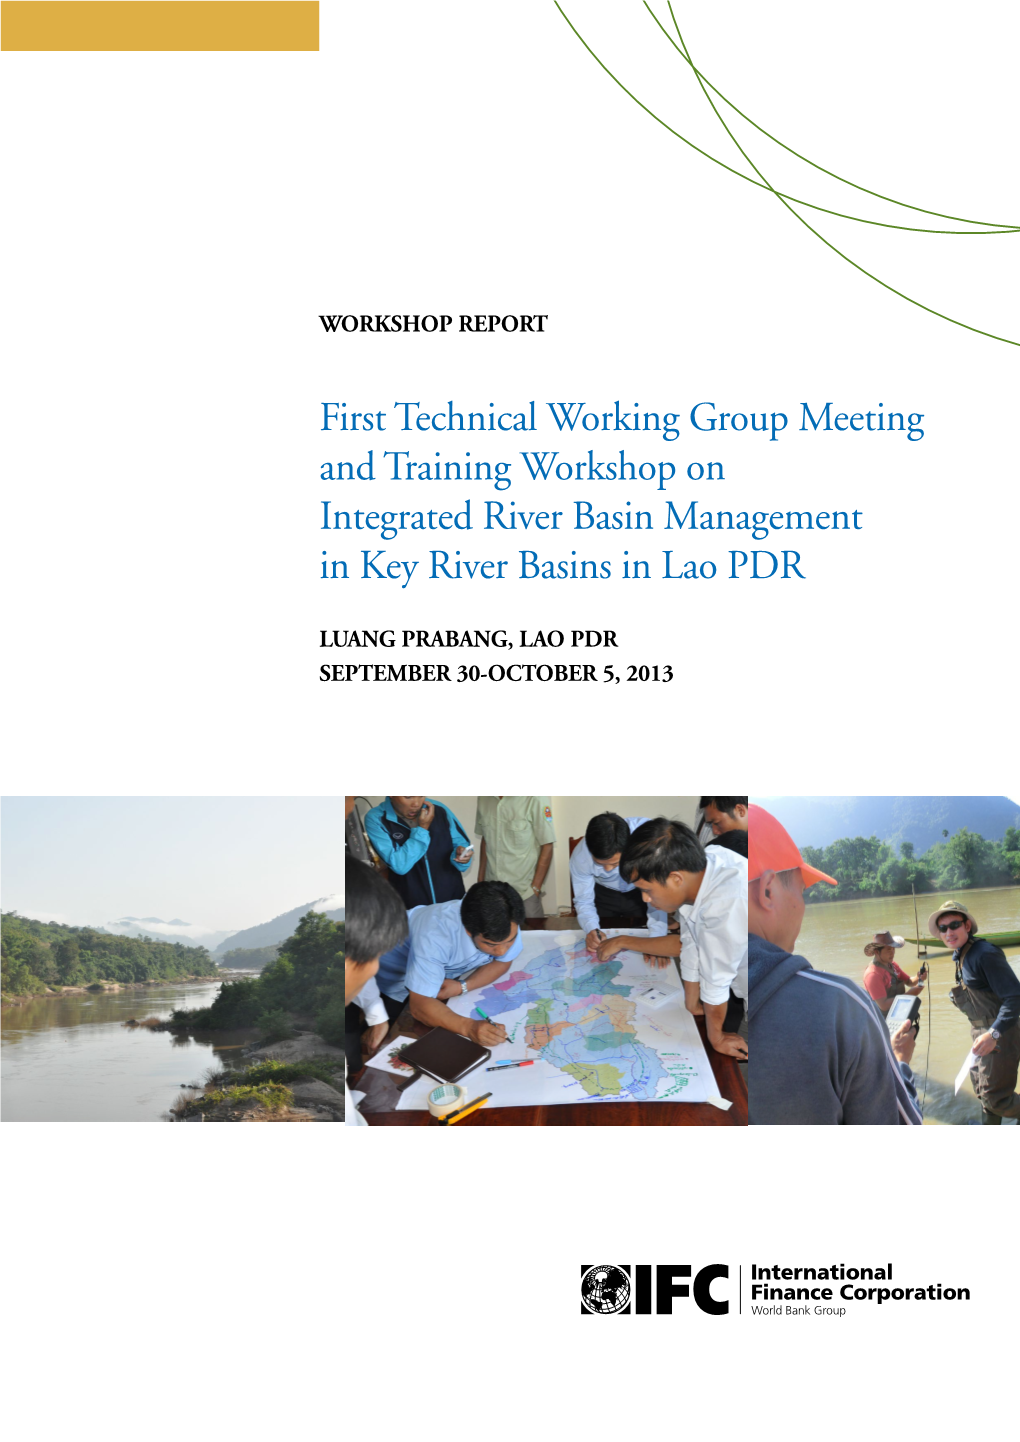 First Technical Working Group Meeting and Training Workshop on Integrated River Basin Management in Key River Basins in Lao PDR